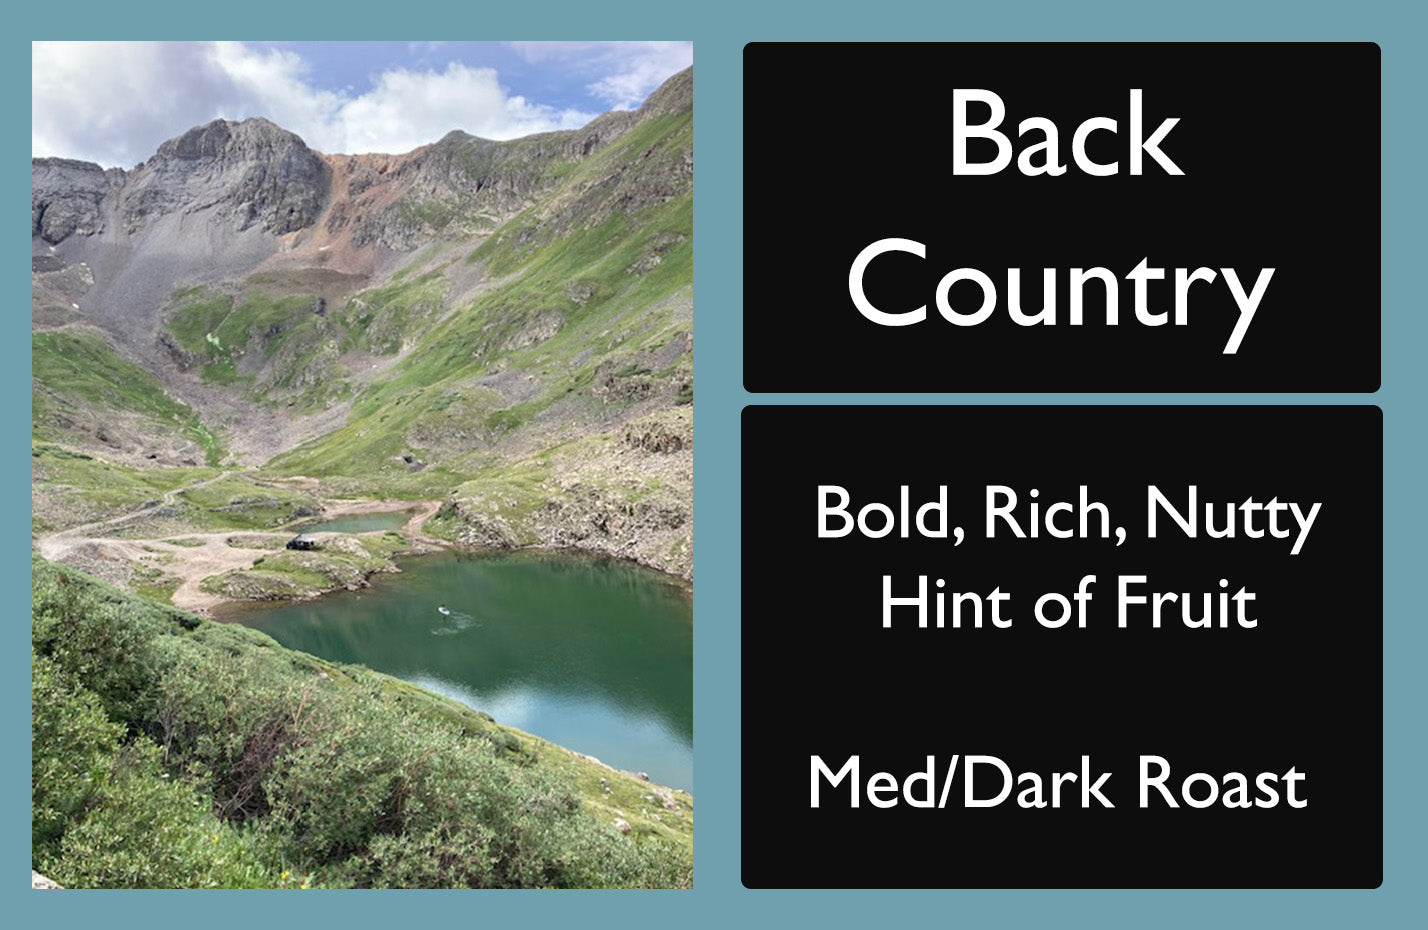 Picture of a bag of Back Country Blend Coffee